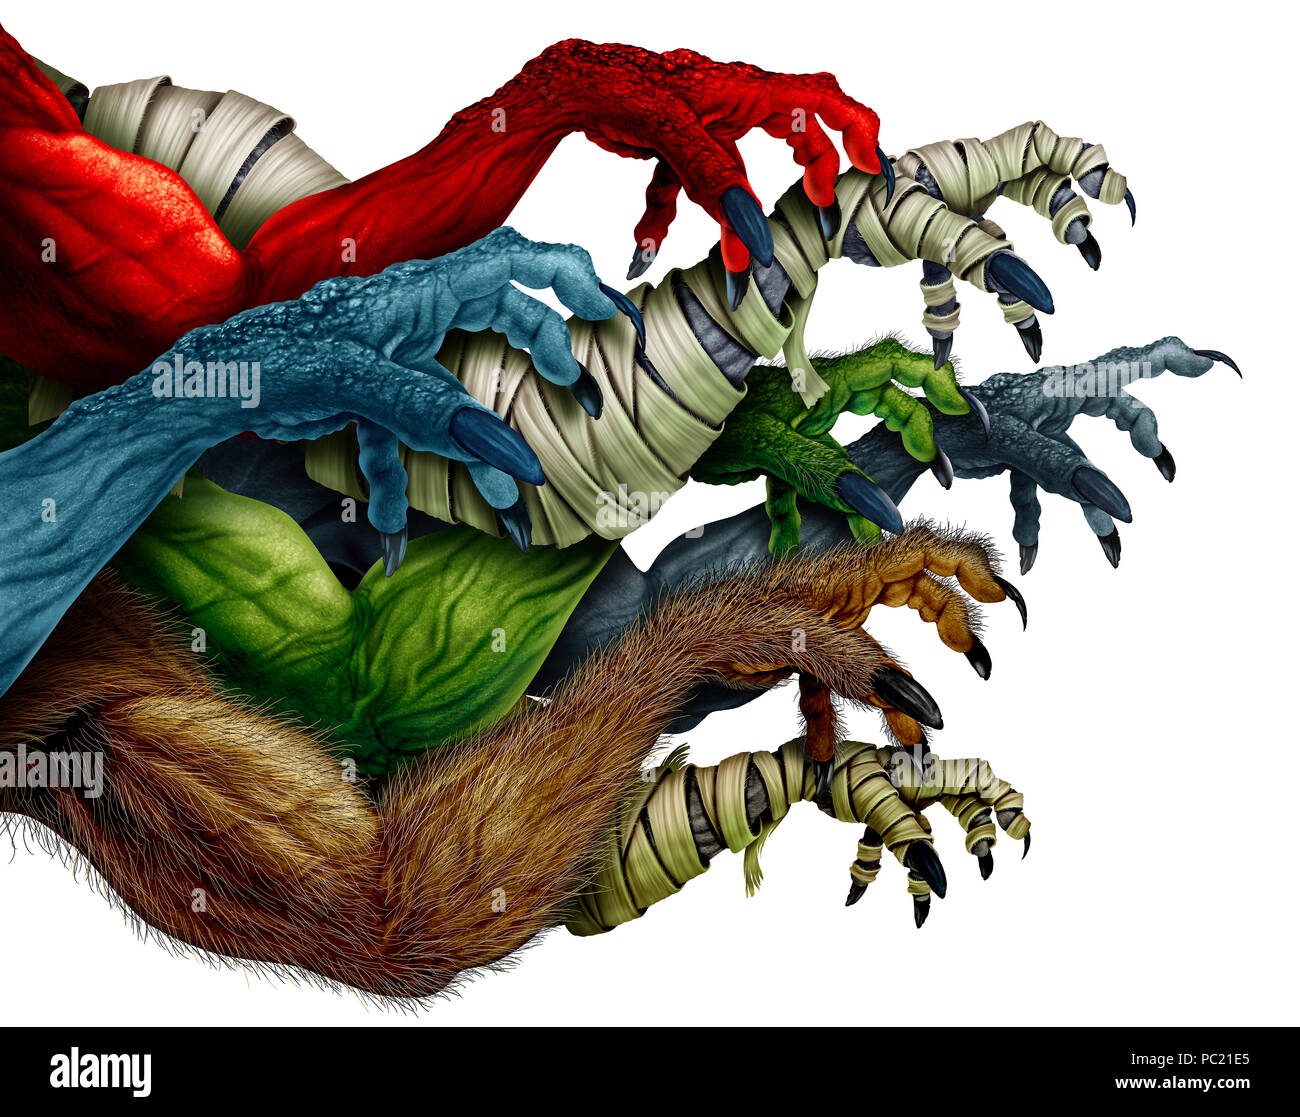 Group of monster arms isolated on a white background as a grabbing zombie mummy werewolf and red demon as a creepy halloween design element. Stock Photo